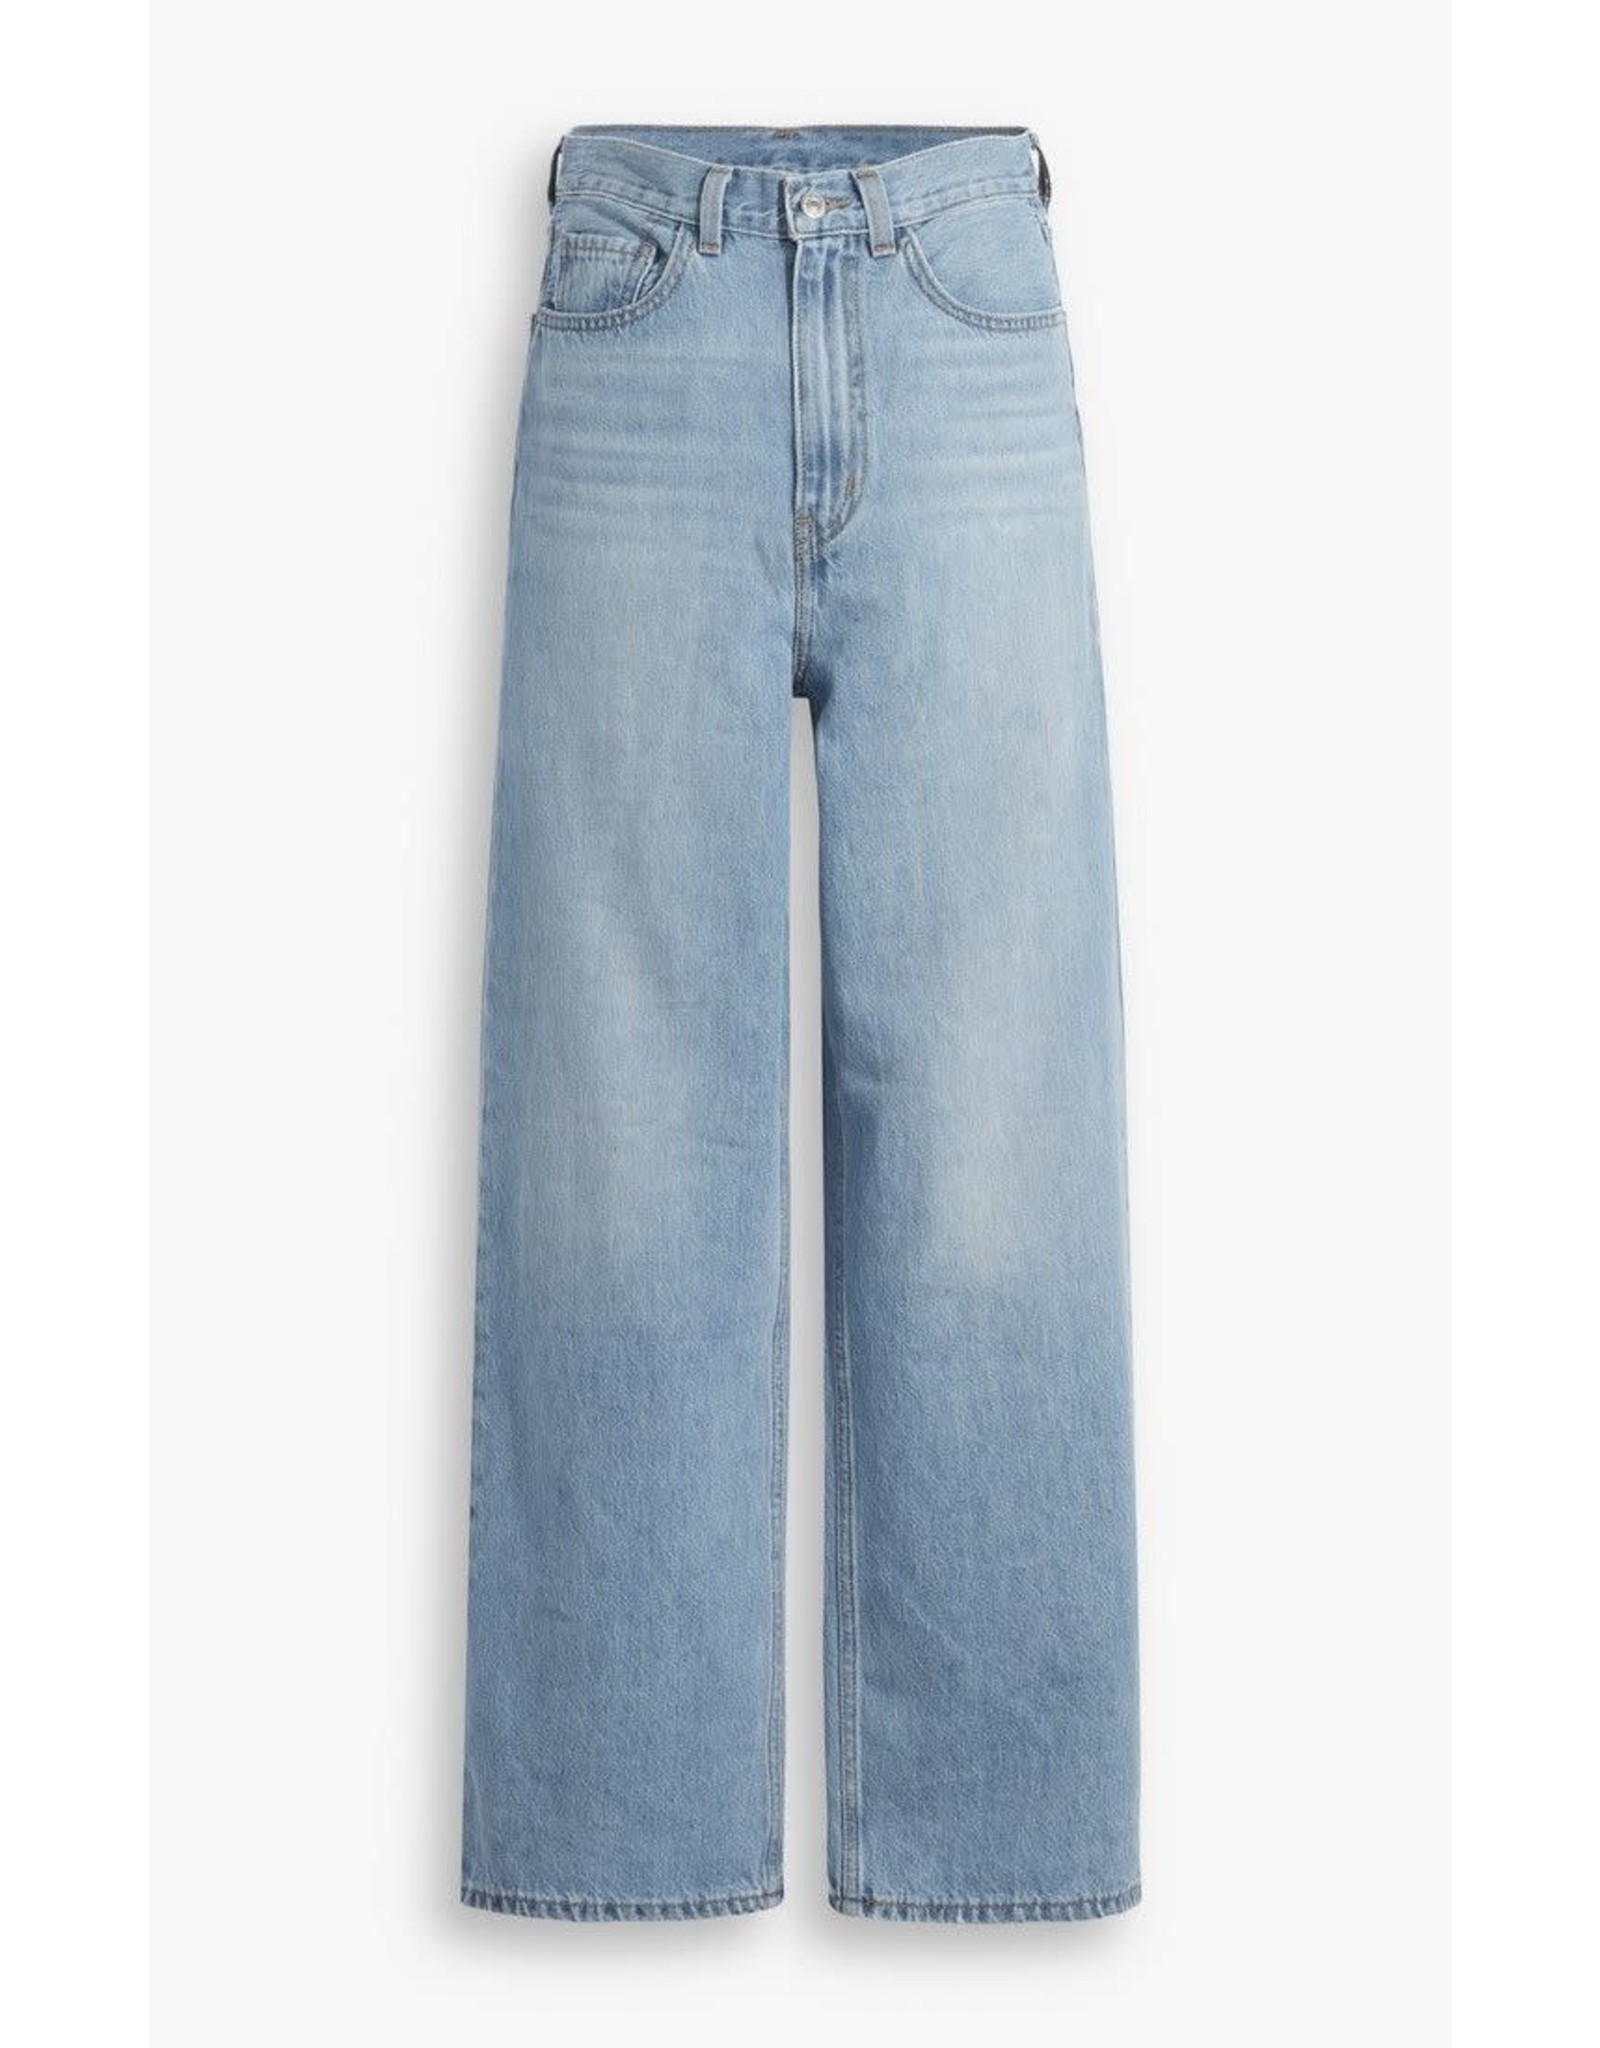 Levi's - High Waisted Straight / In a Pinch